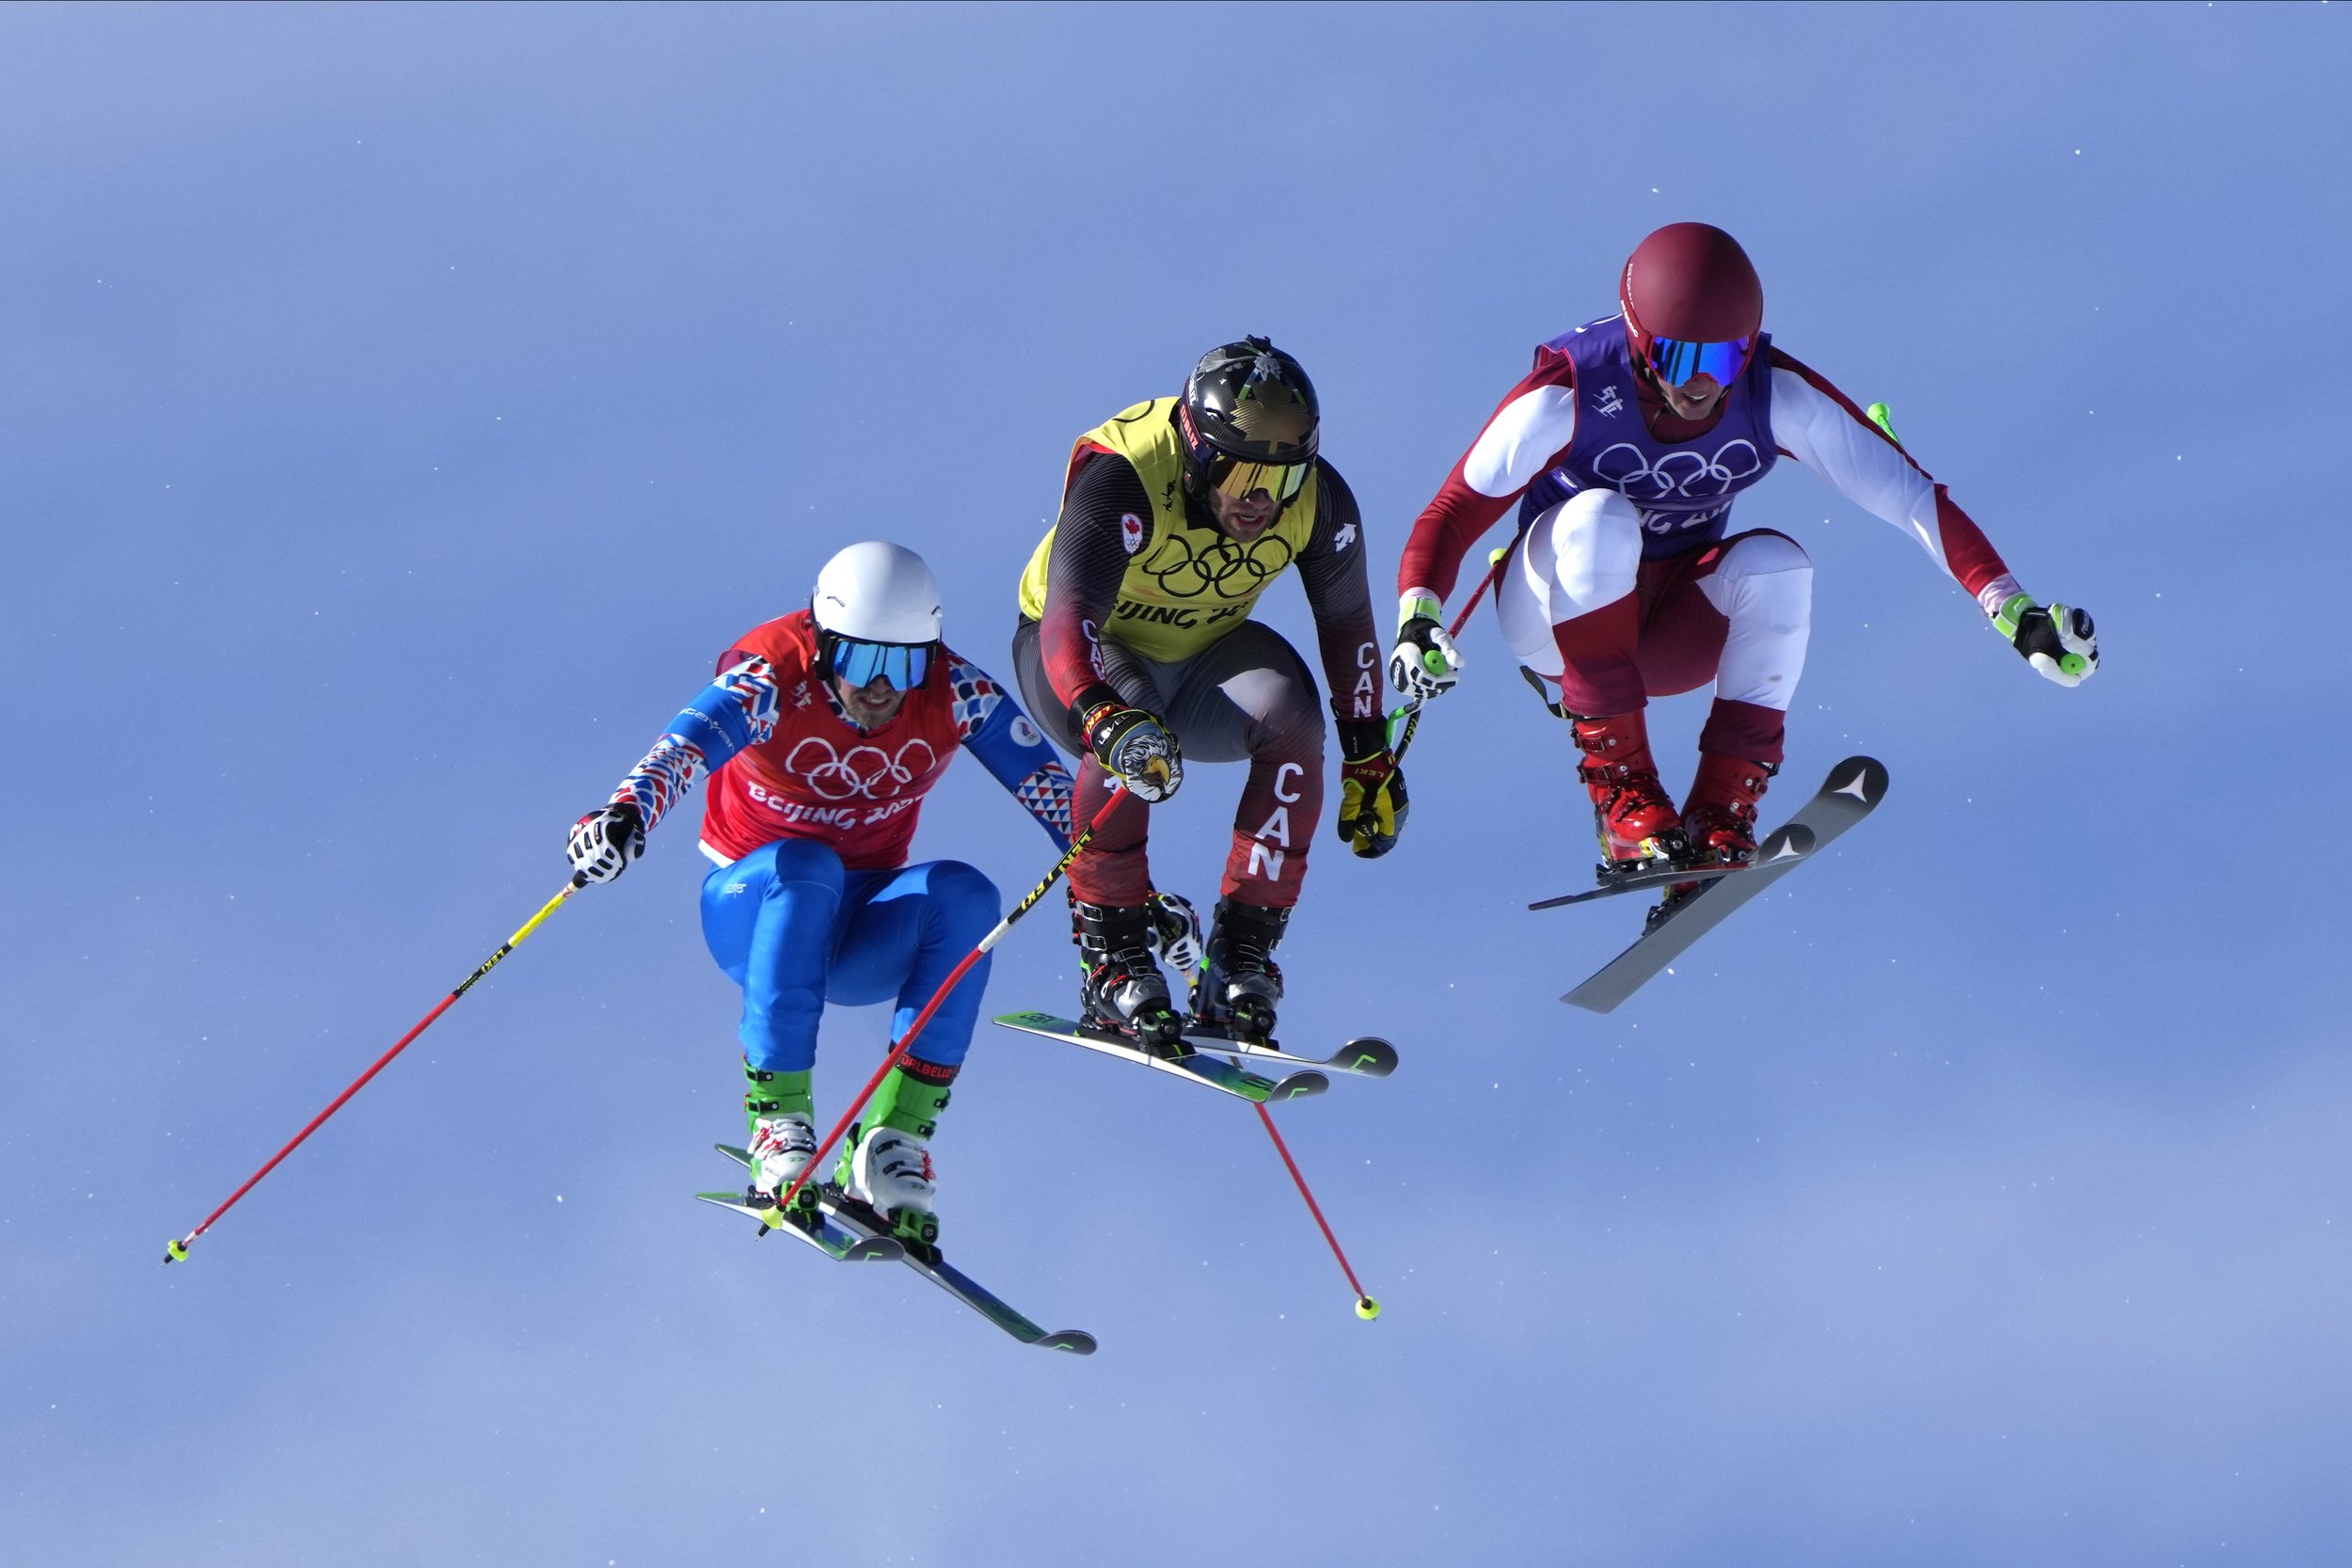  Austria's Johannes Rohrweck, right, Canada's Kevin Drury and Igor Omelin, of the Russian Olympic Committee, competes during the men's cross finals at the 2022 Winter Olympics, Friday, Feb. 18, 2022, in Zhangjiakou, China. (AP Photo/Lee Jin-man) 